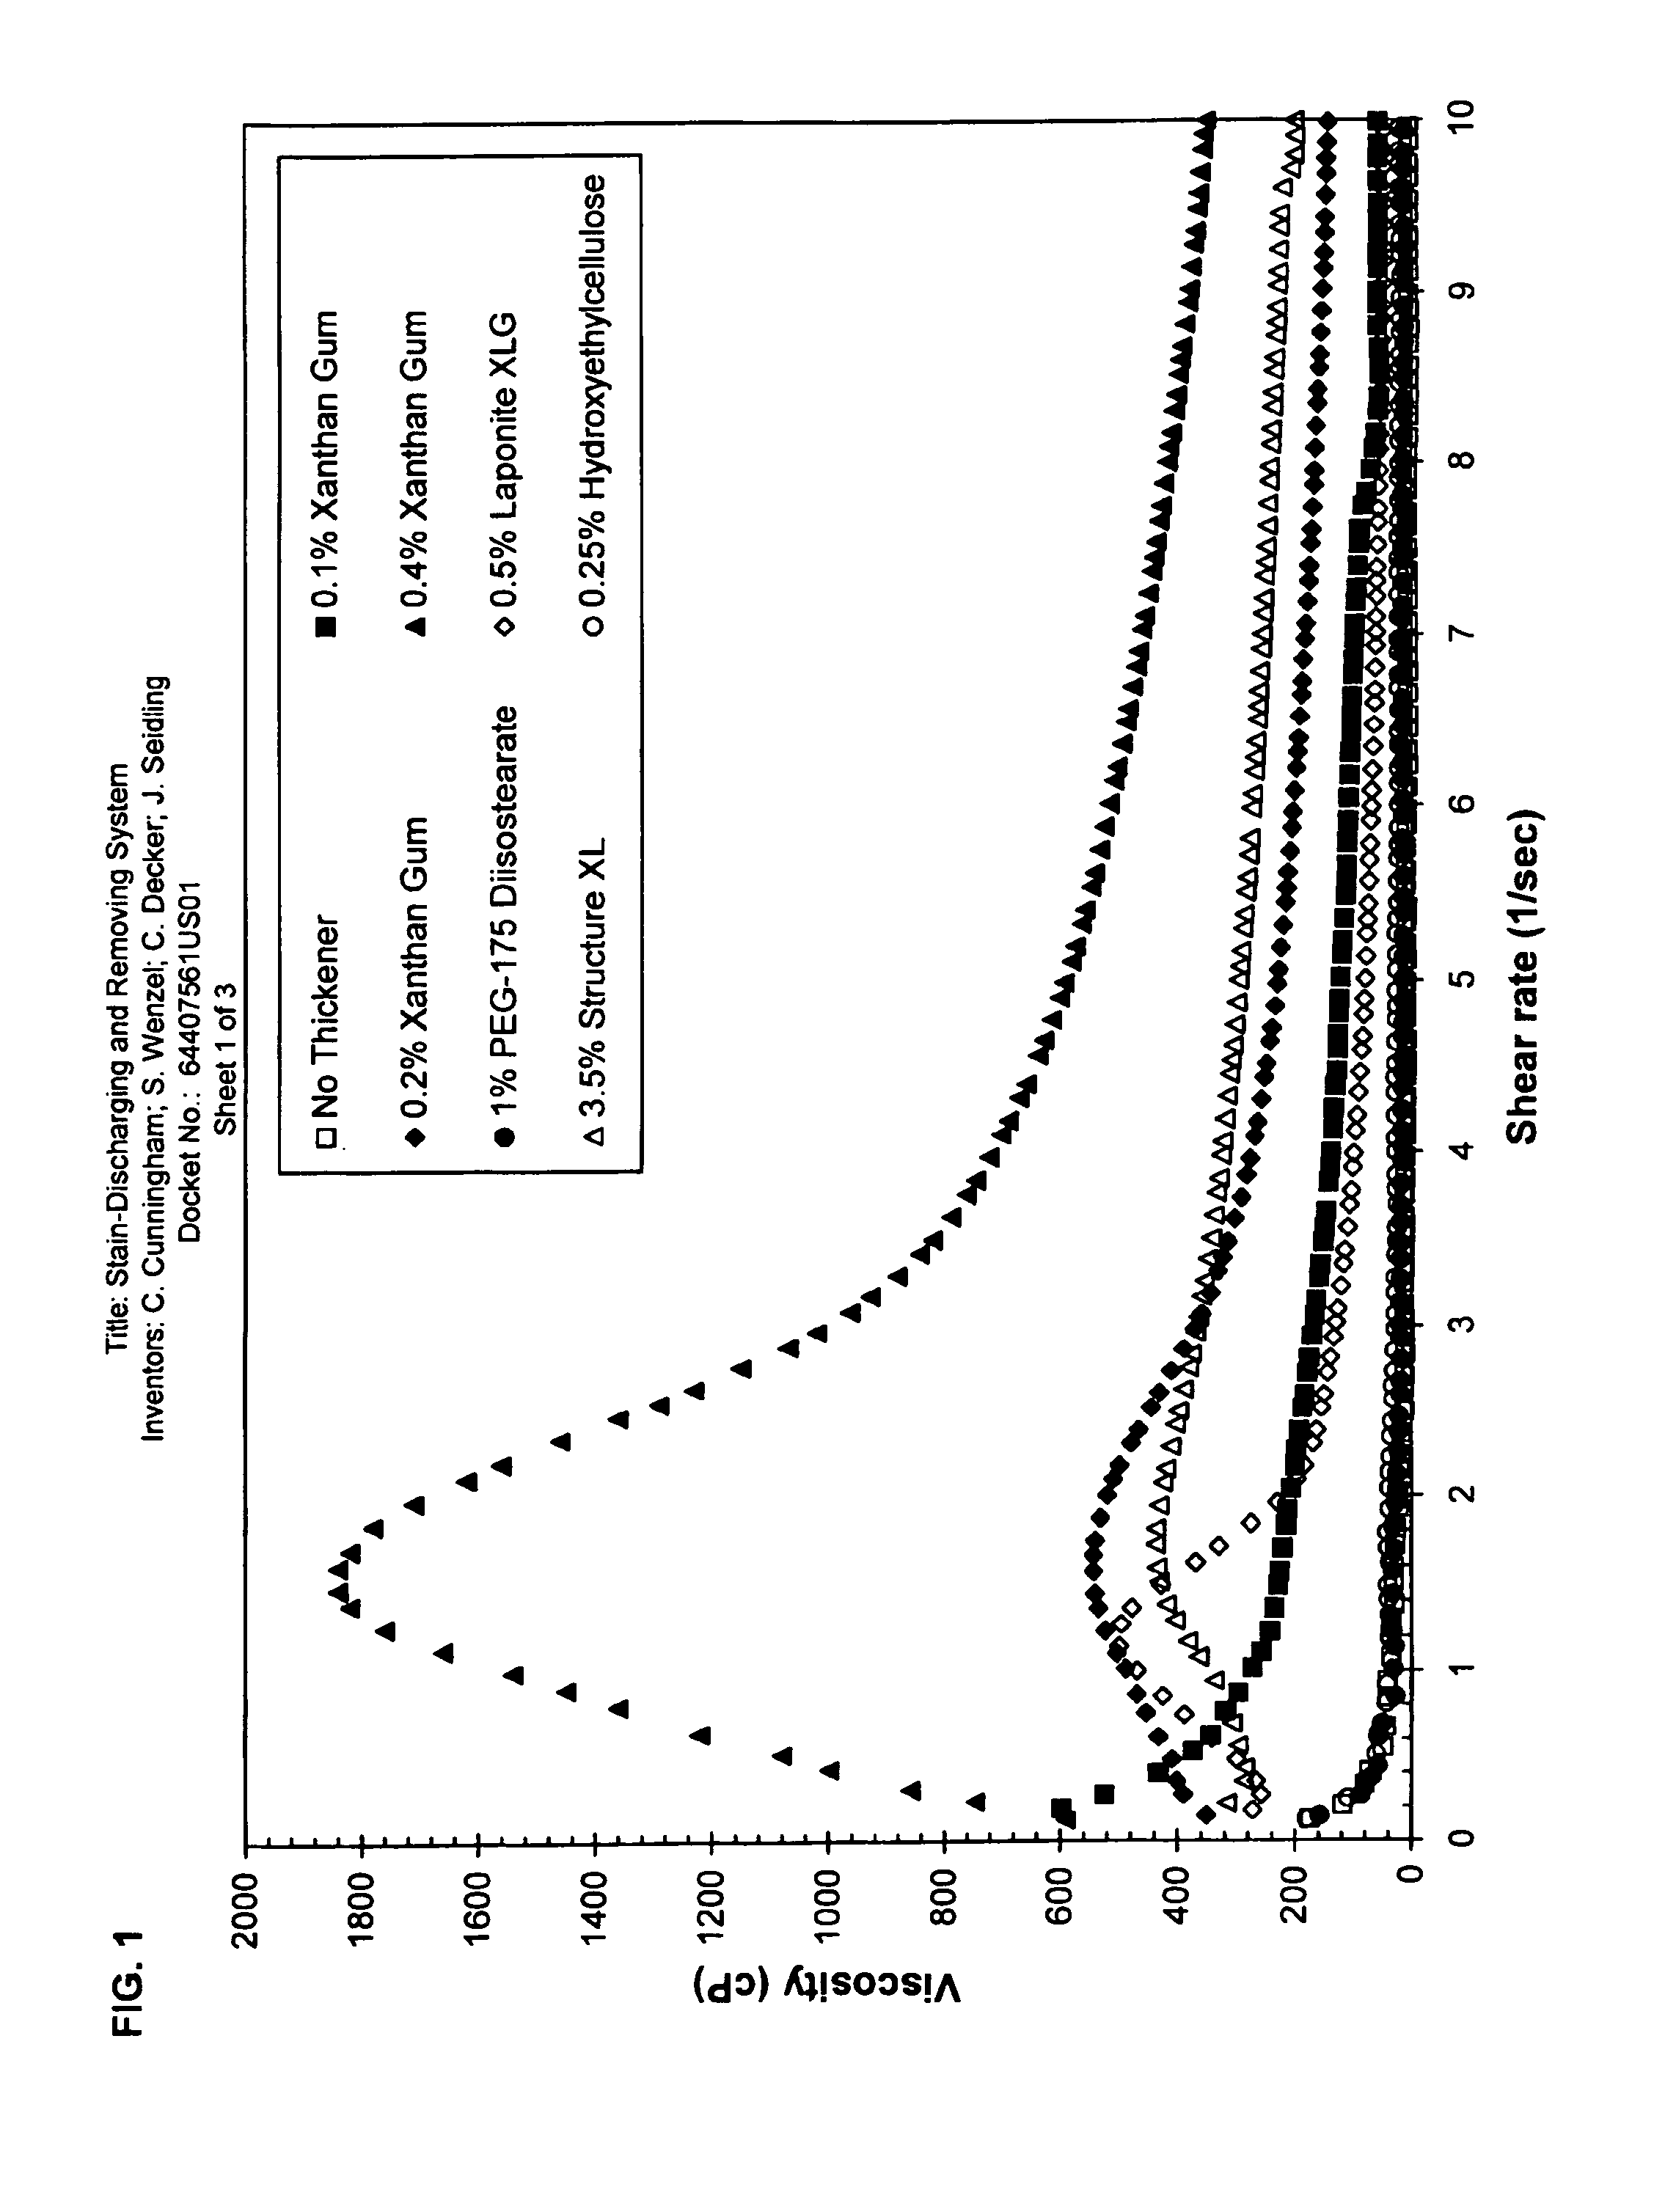 Stain-discharging and removing system